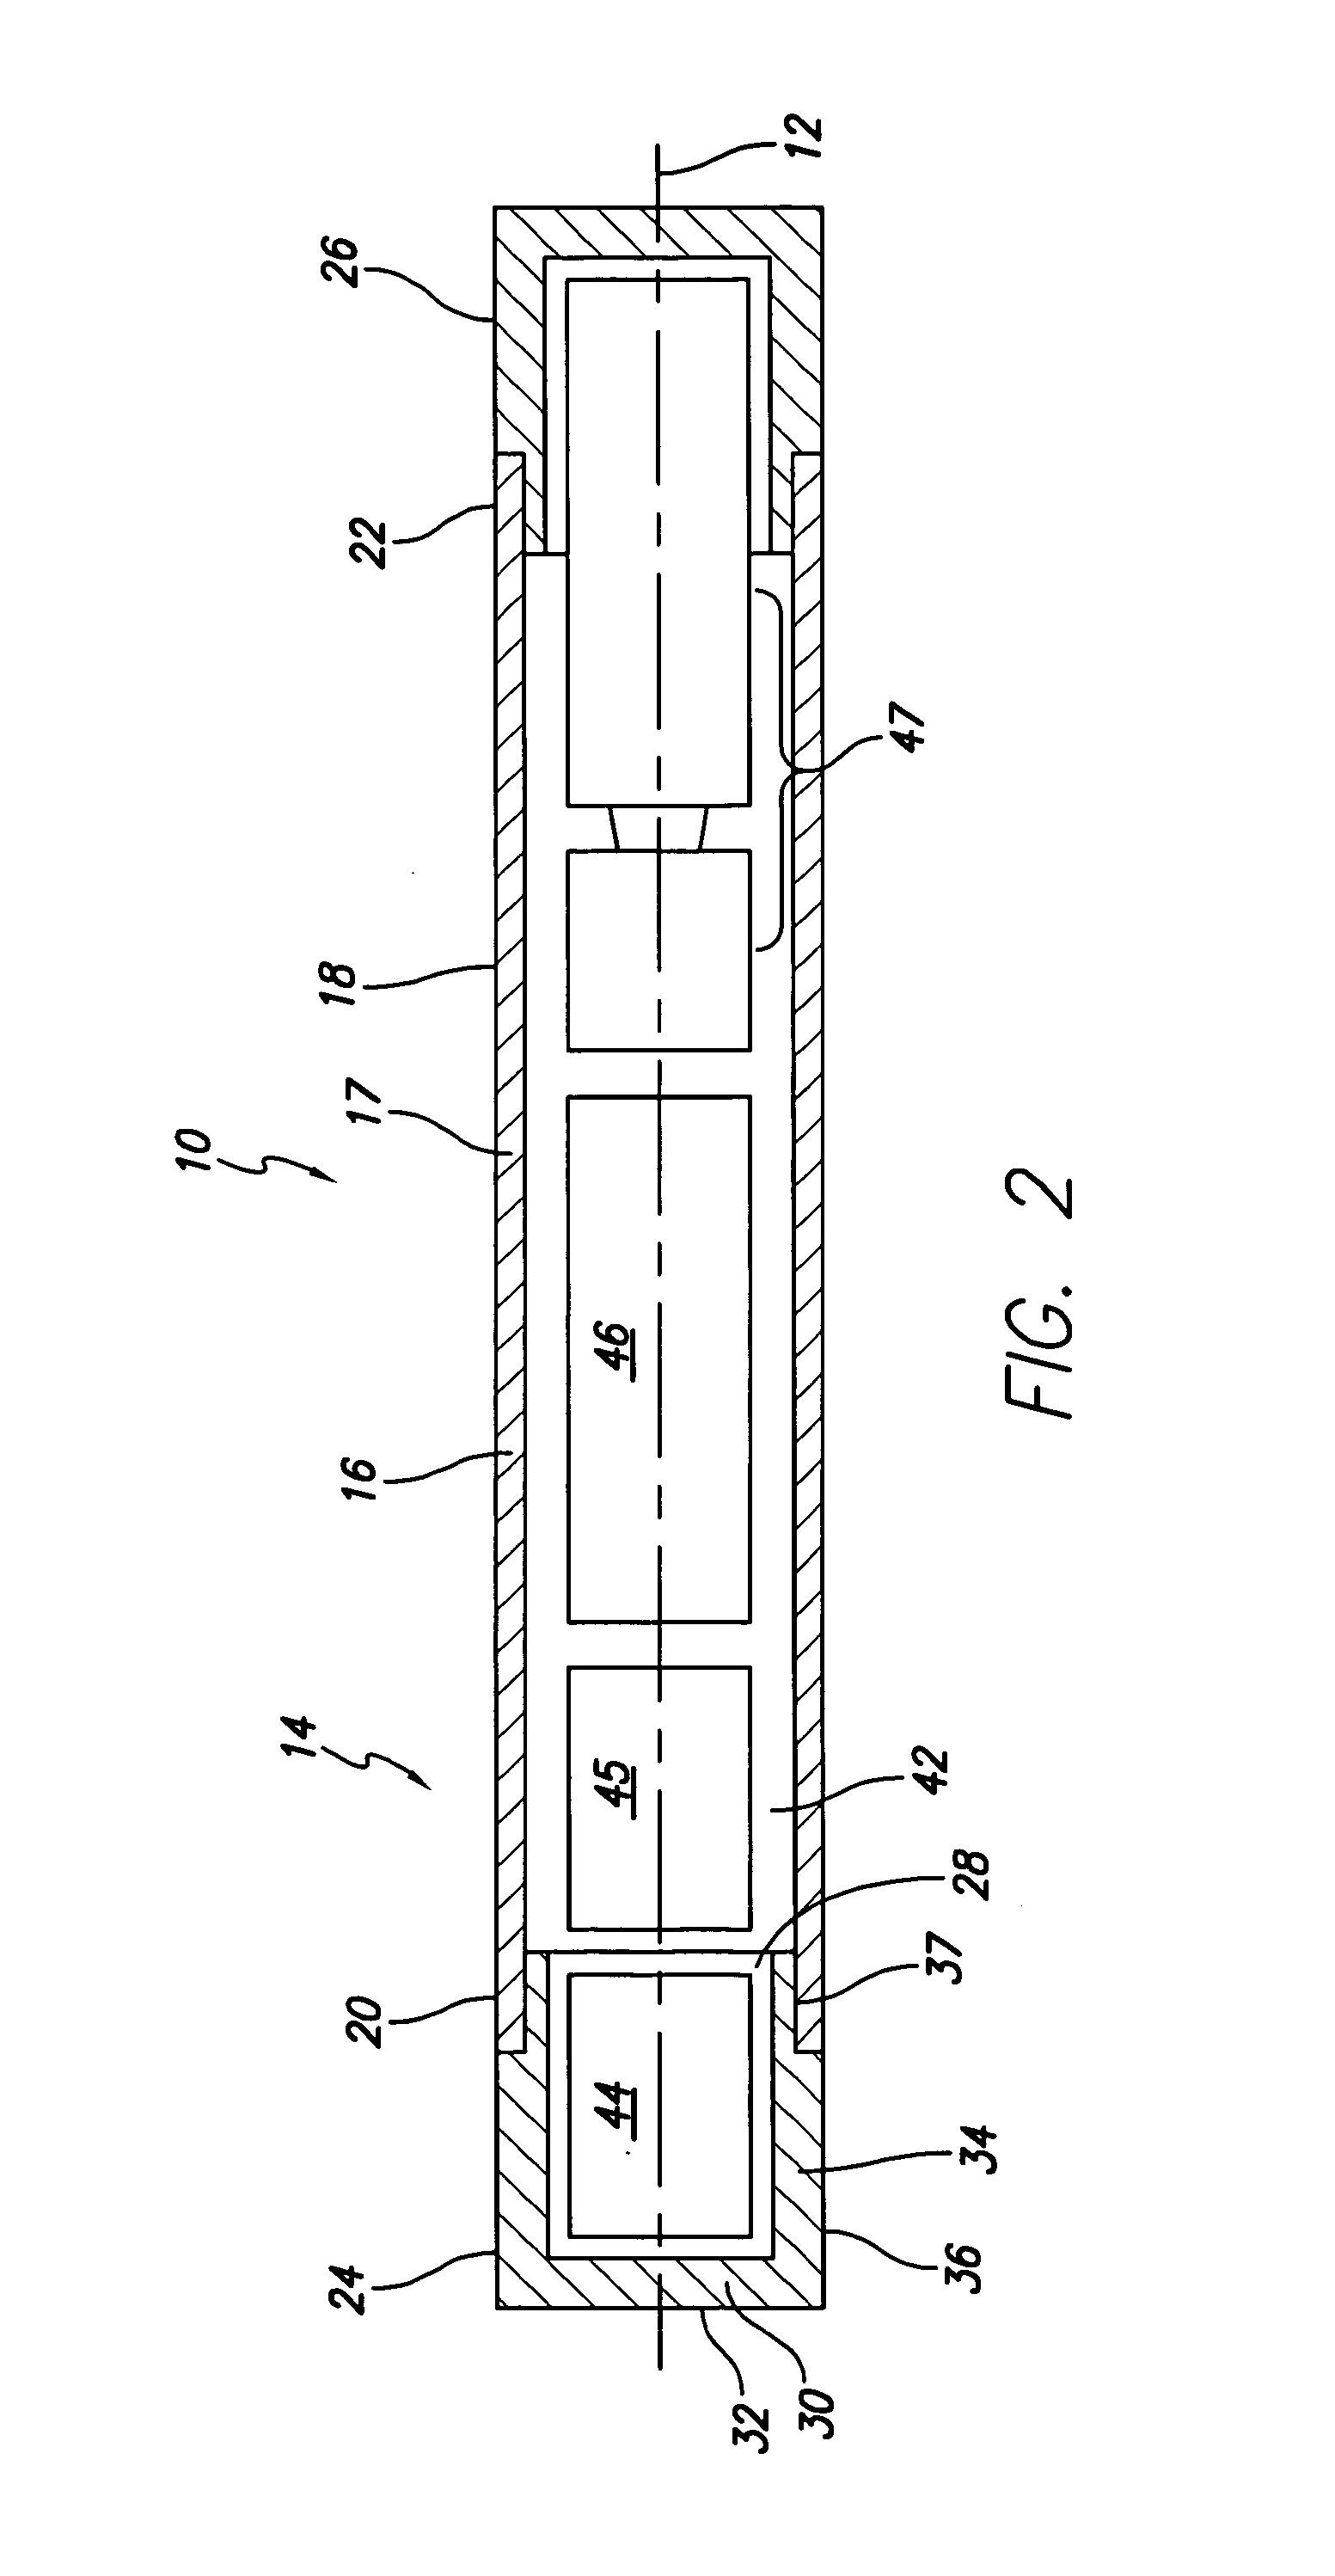 Cardiac event microrecorder and method for implanting same